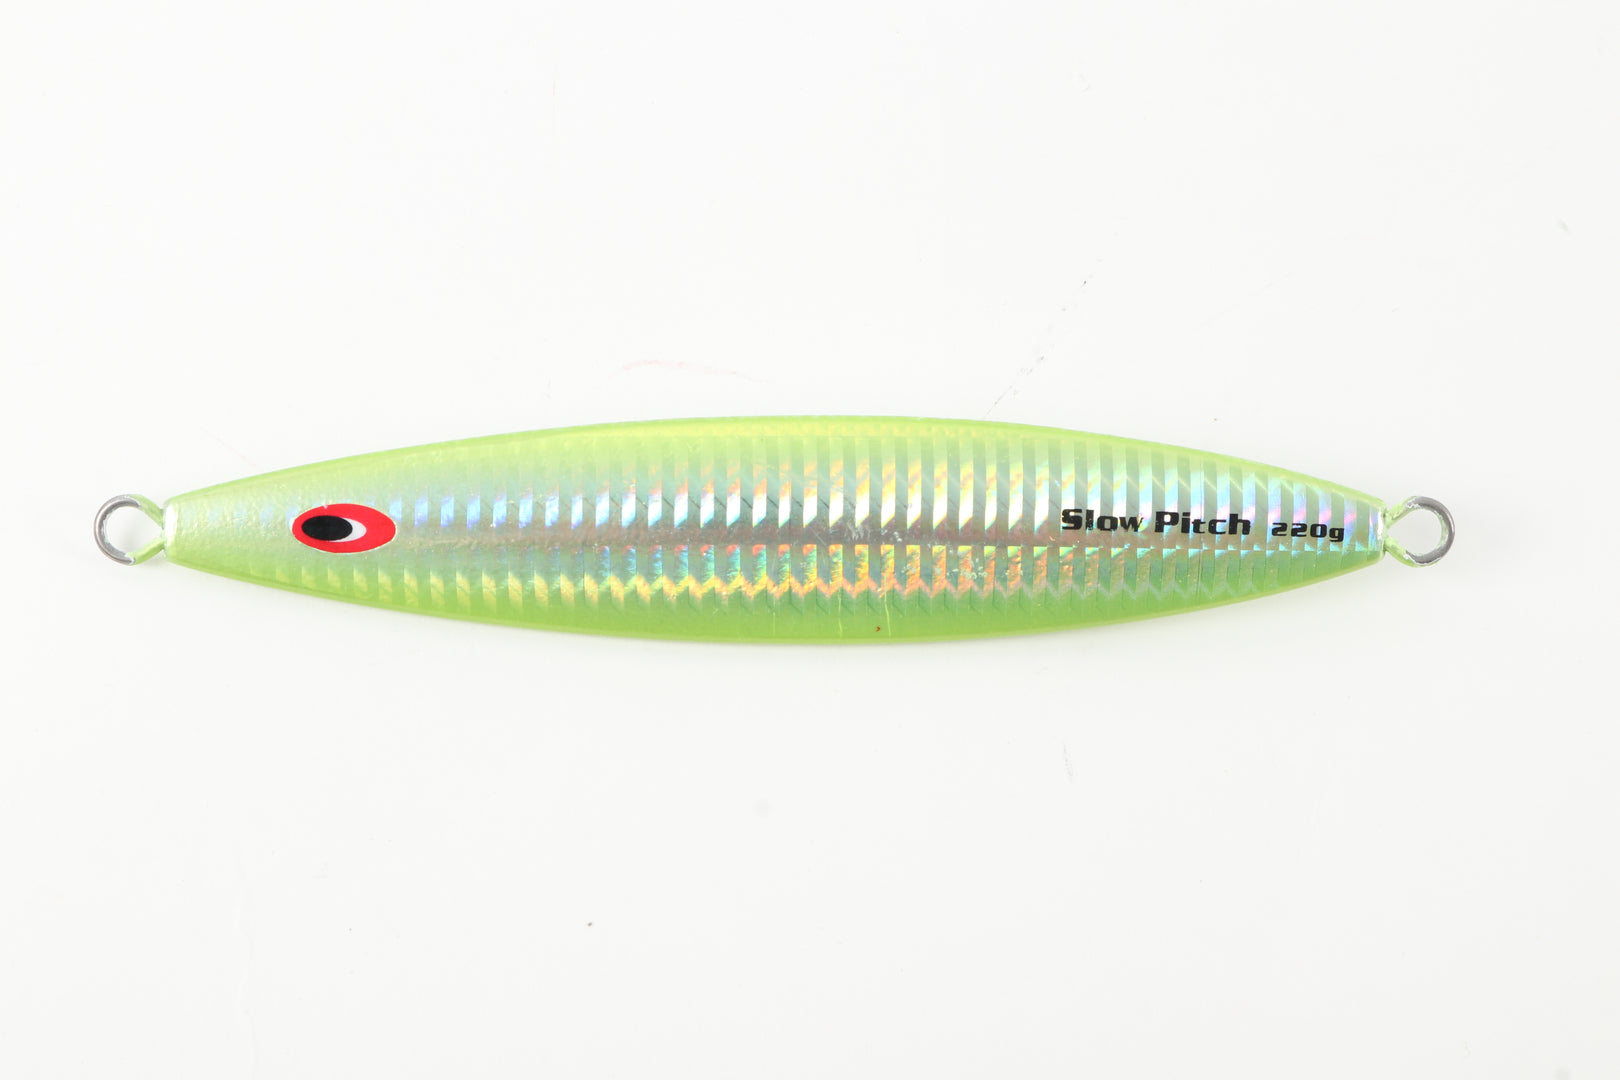 Ocean Tackle OTI-1109-135 Slow Pitch Jig 135g Chartreuse